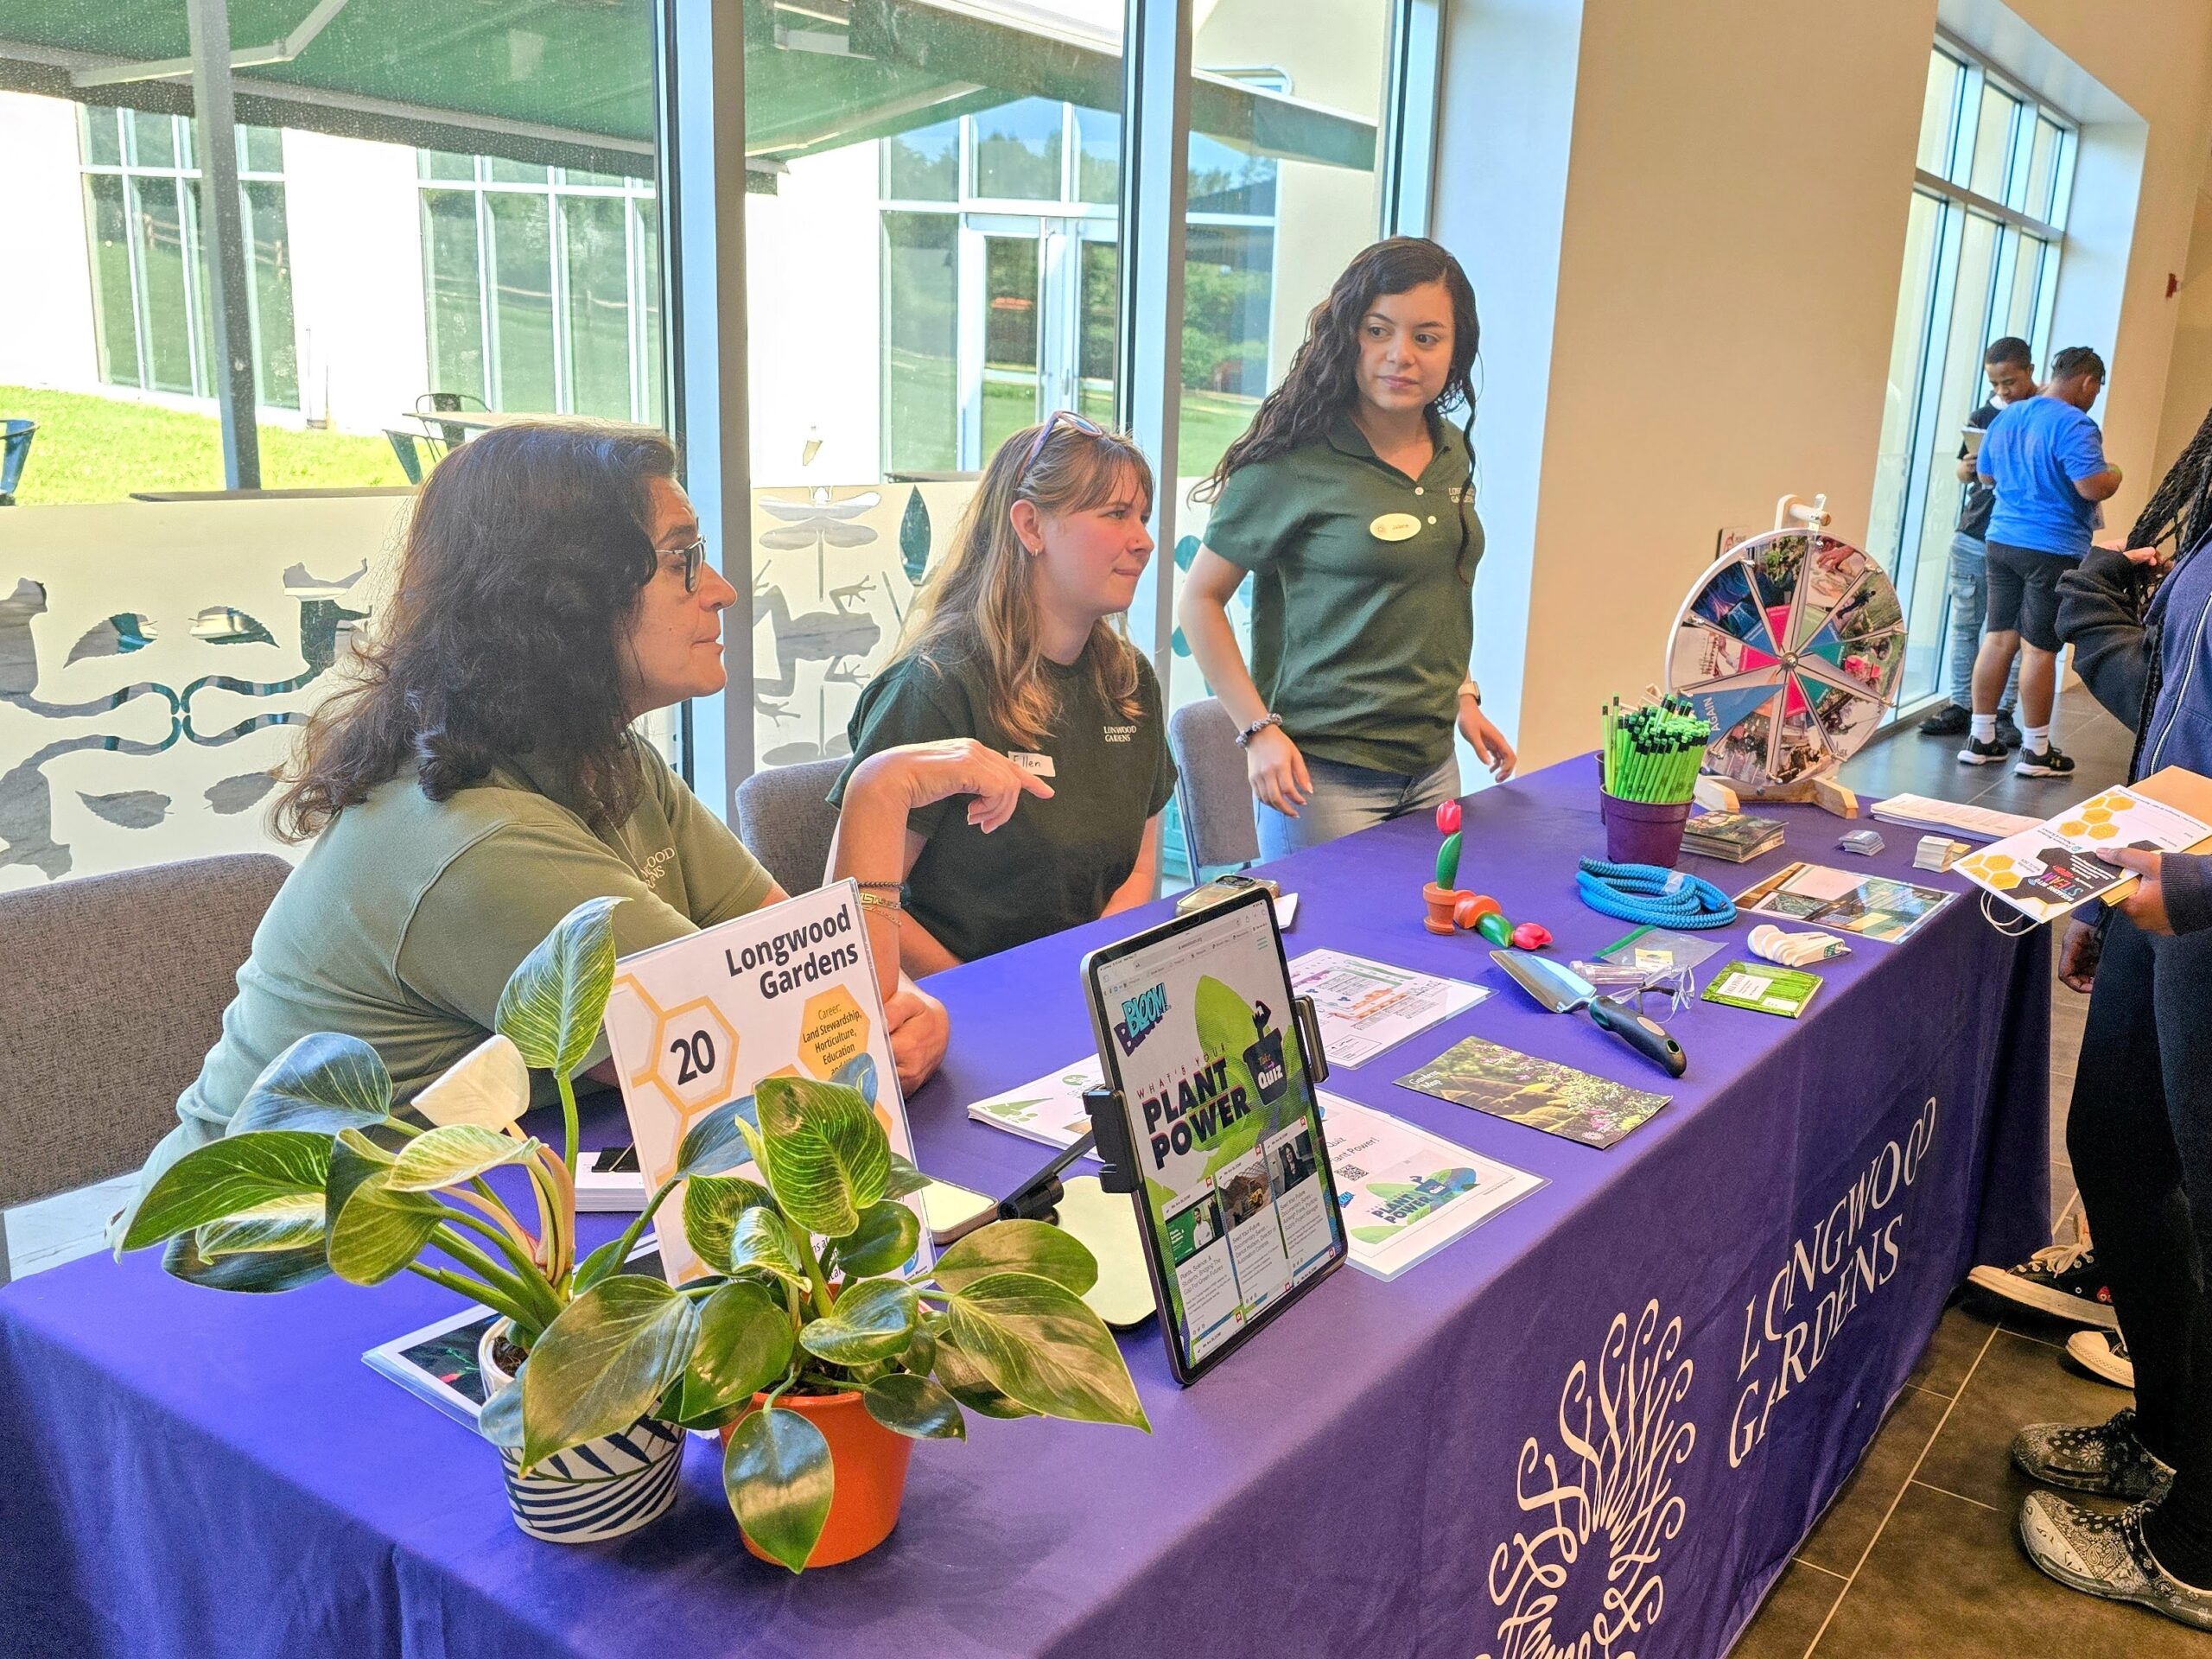 Three people at a Longwood Gardens booth talk with attendees. The booth features plants, brochures, a spinning wheel game, and promotional materials on a purple tablecloth.